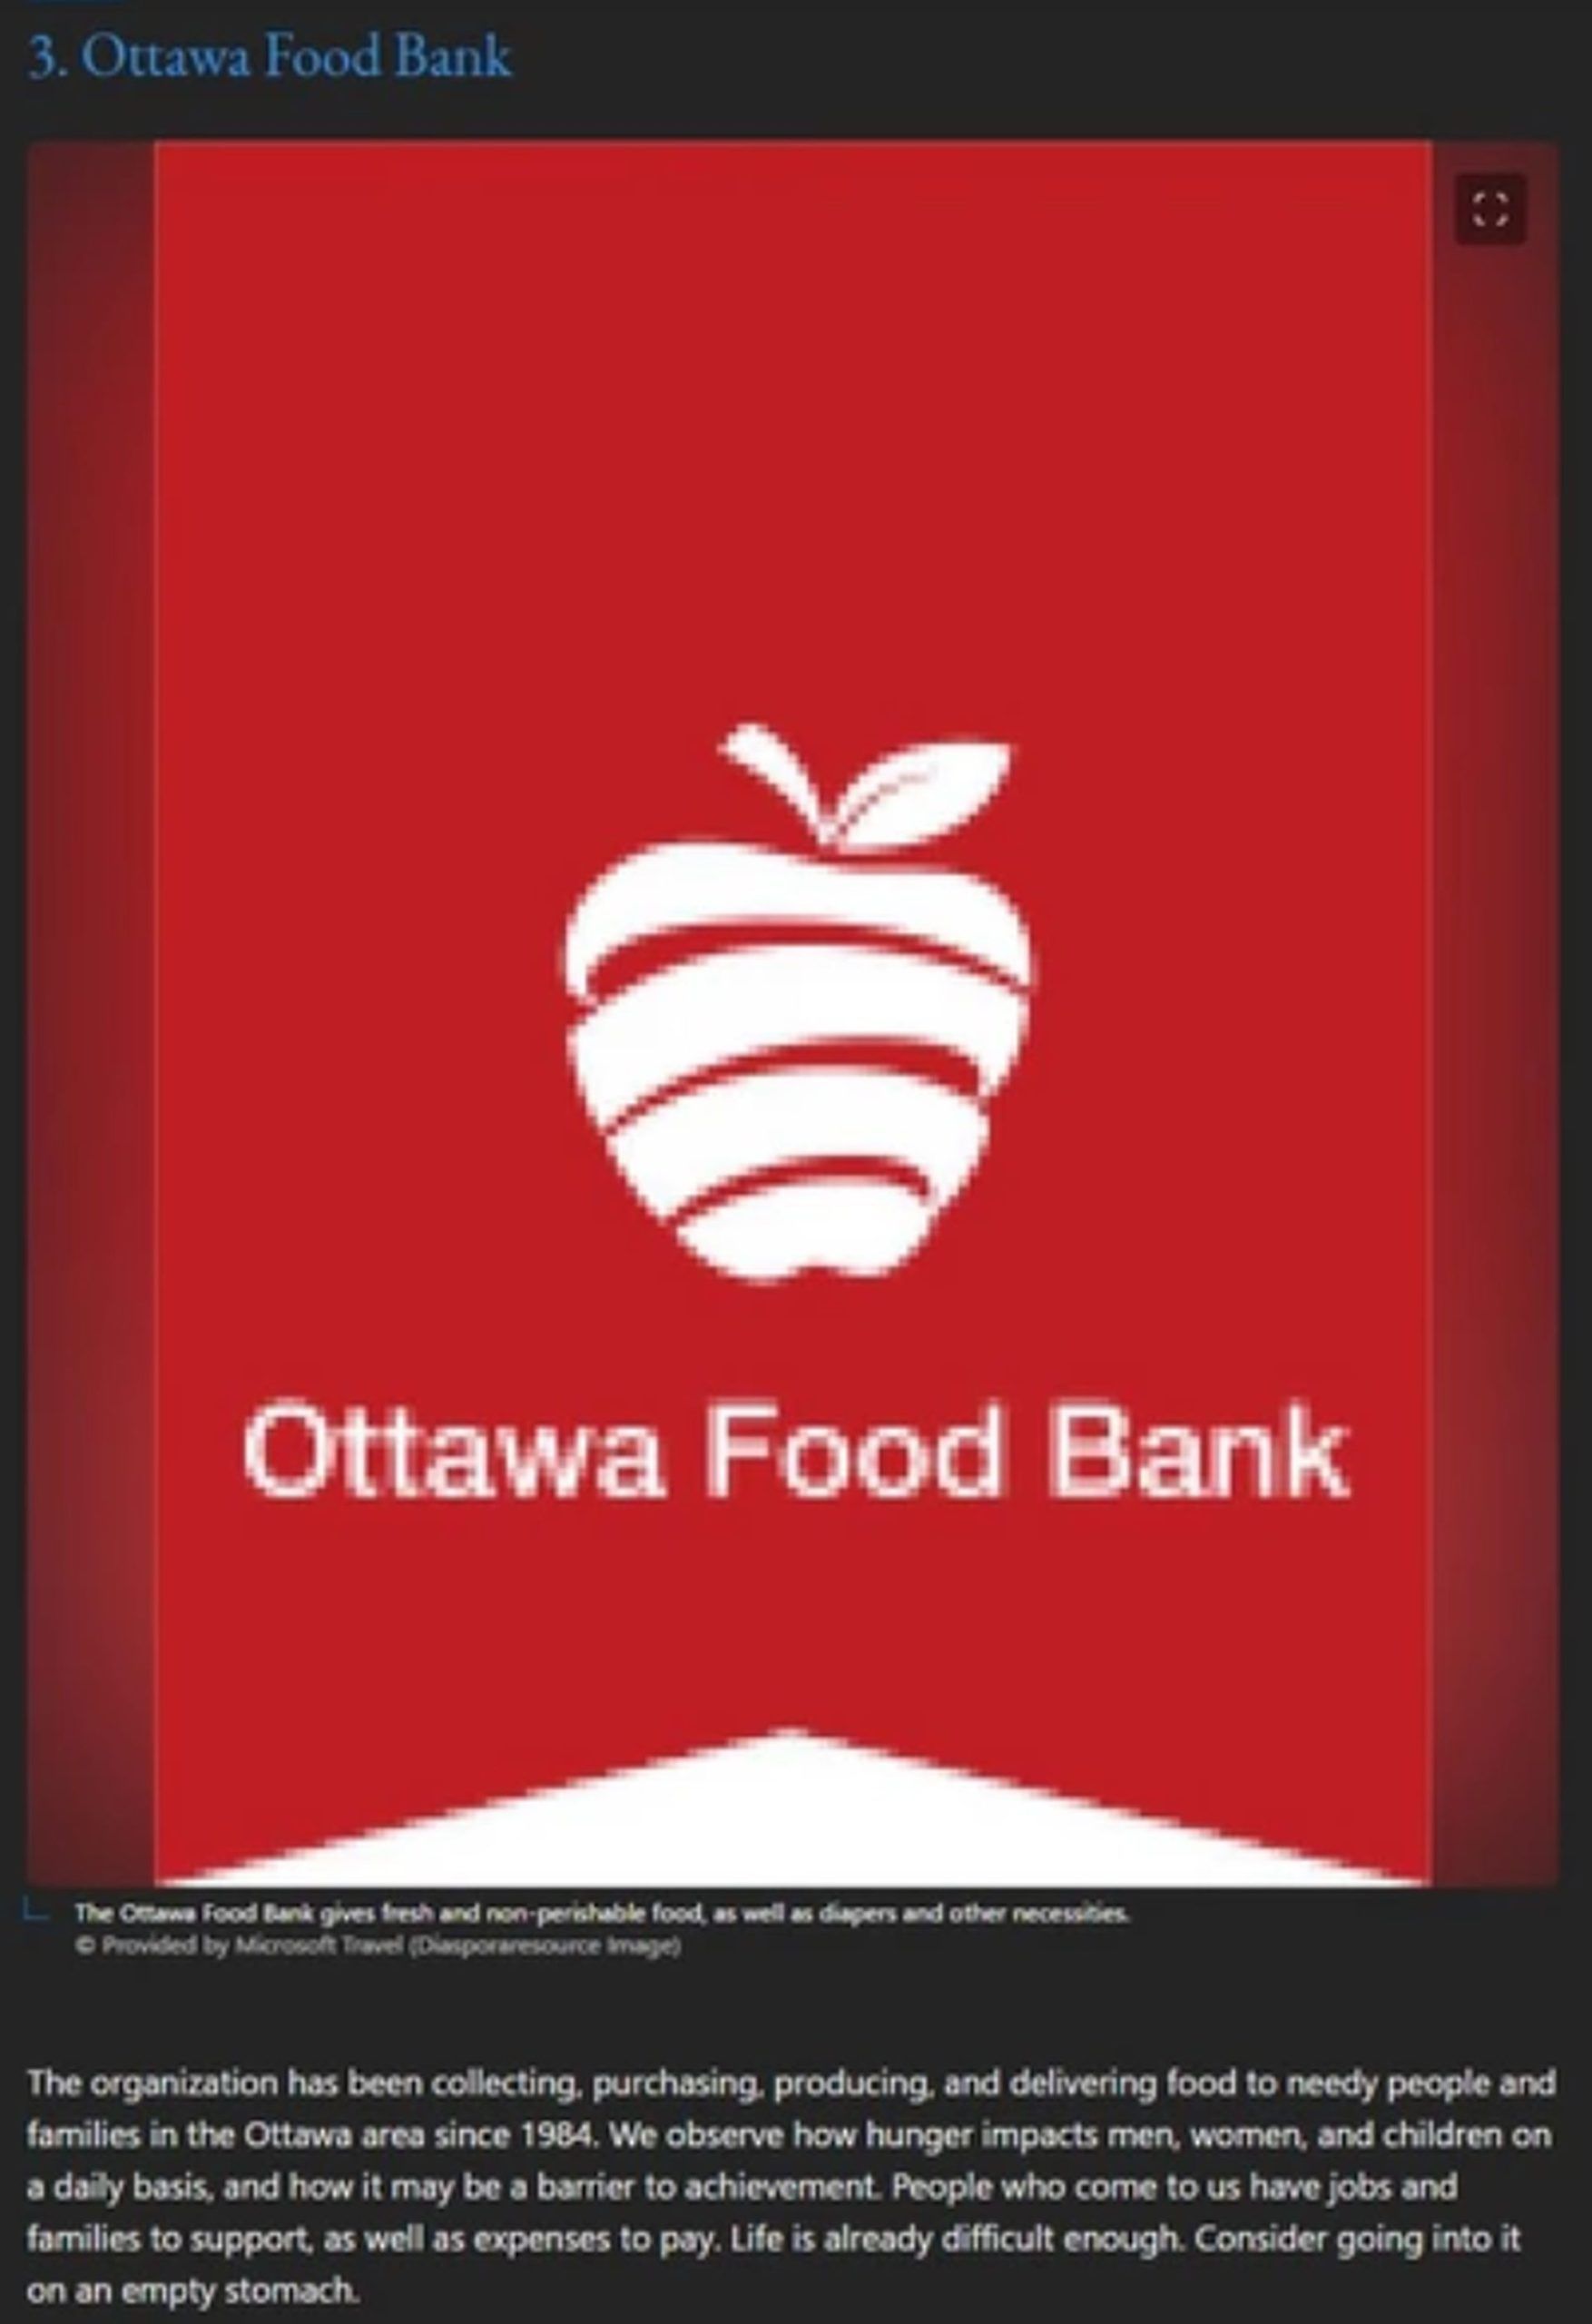 According to Microsoft, you should visit Ottowa Food Bank. Discover the AI mishap, turning a food bank into an unexpected tourist spot.